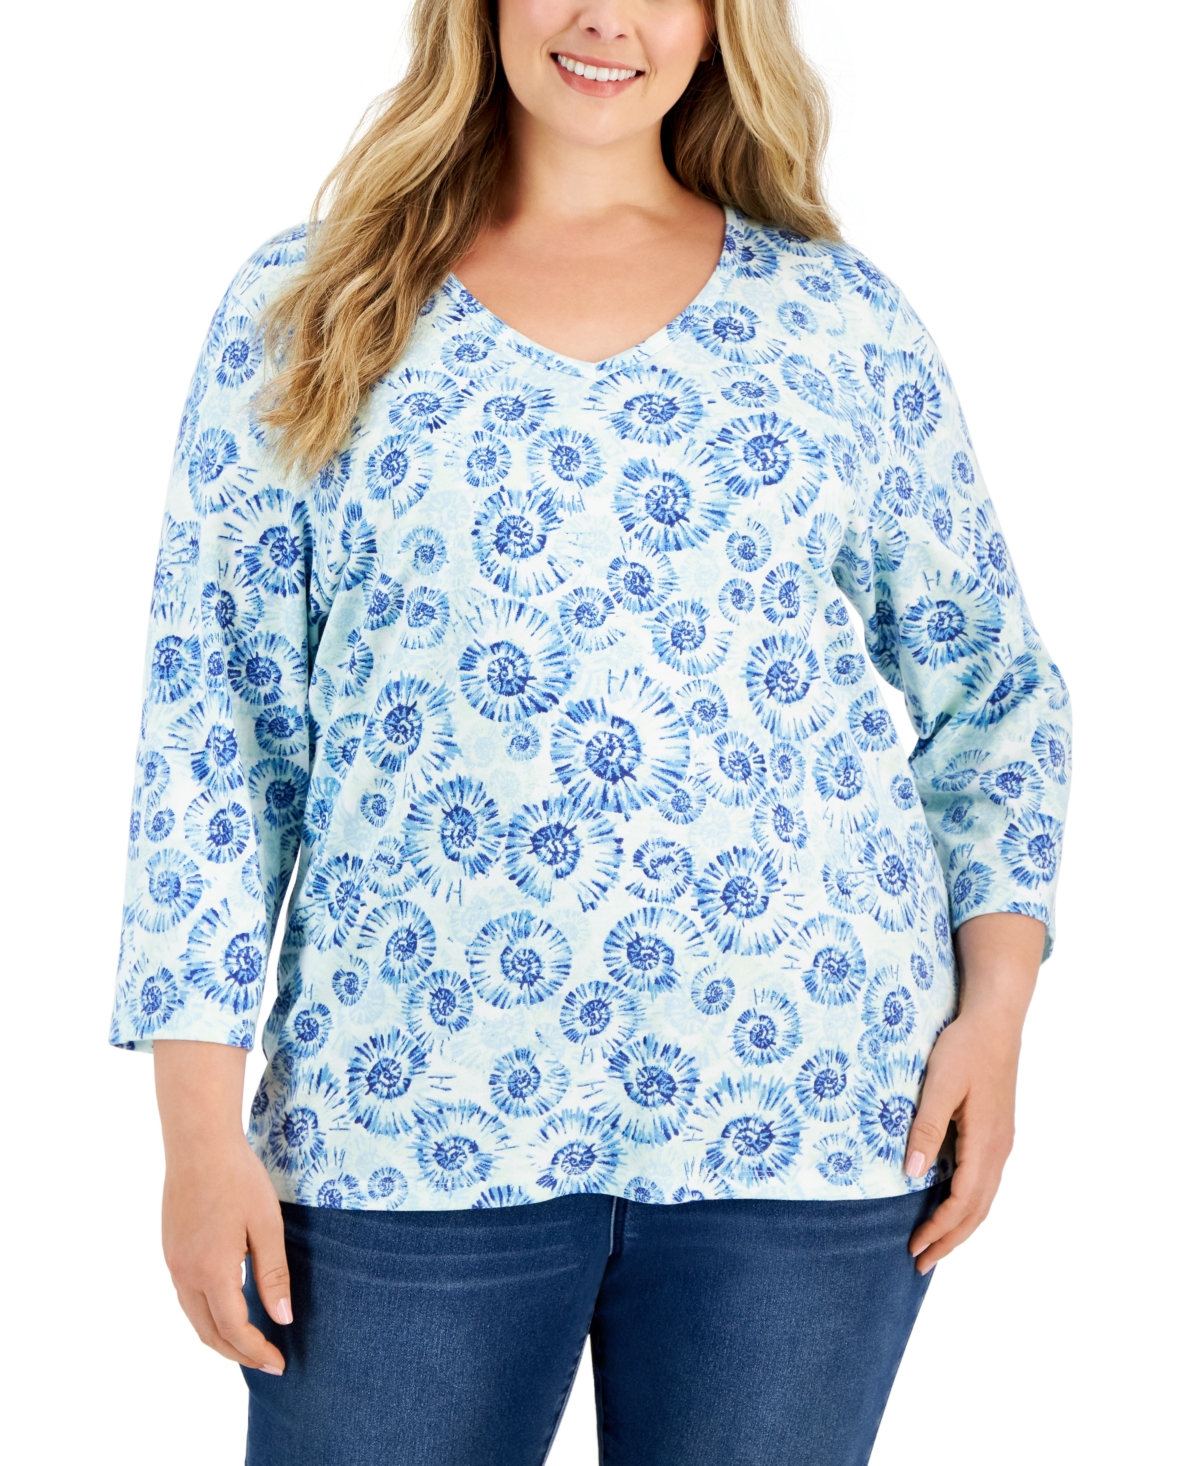 Plus Size 3/4-Sleeve Printed Top, Created for Macy's - Bright White